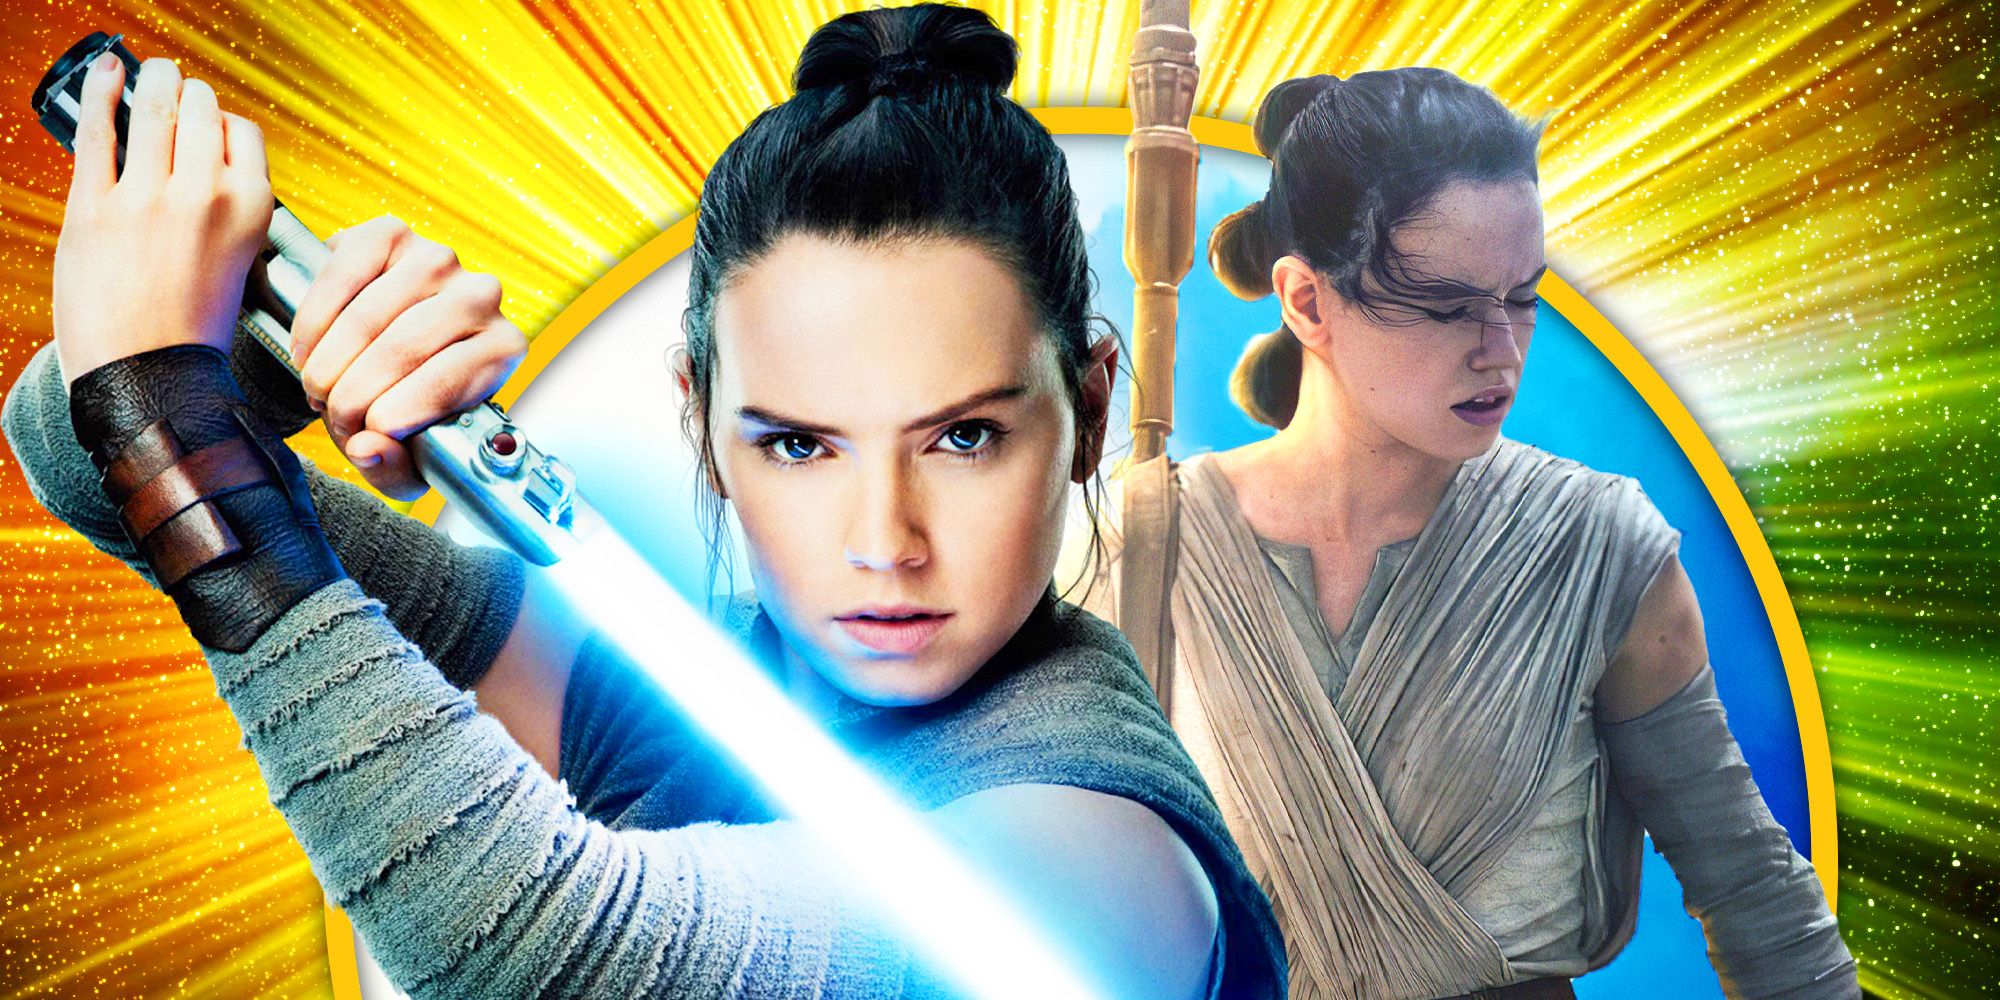 Daisy Ridley as Rey from The Force Awakens and The Last Jedi